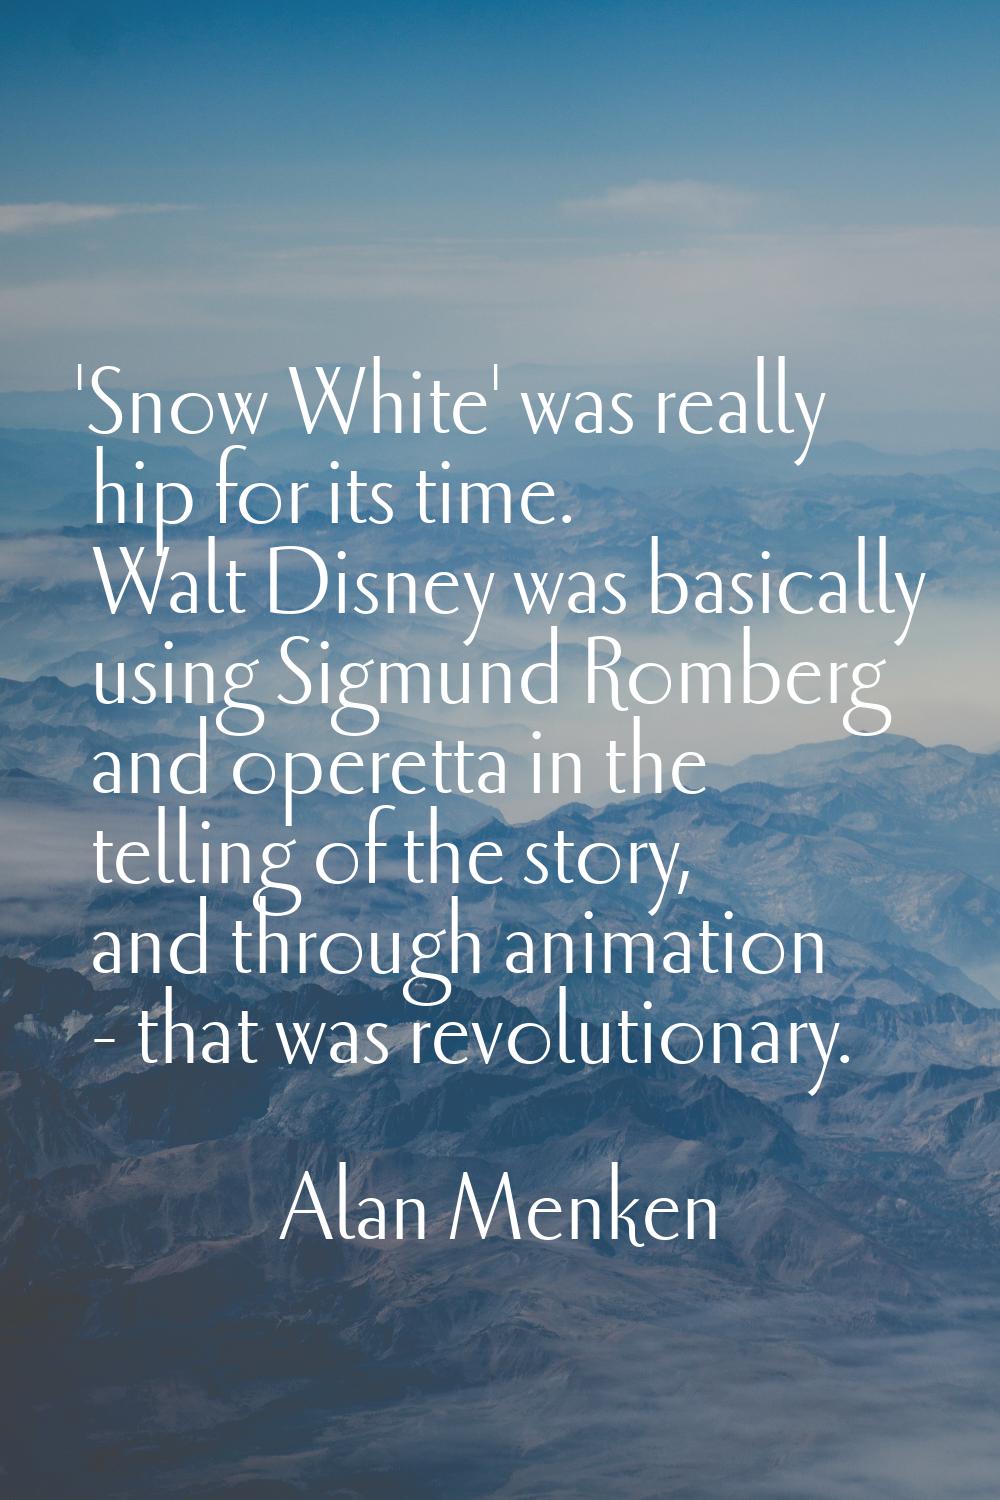 'Snow White' was really hip for its time. Walt Disney was basically using Sigmund Romberg and opere